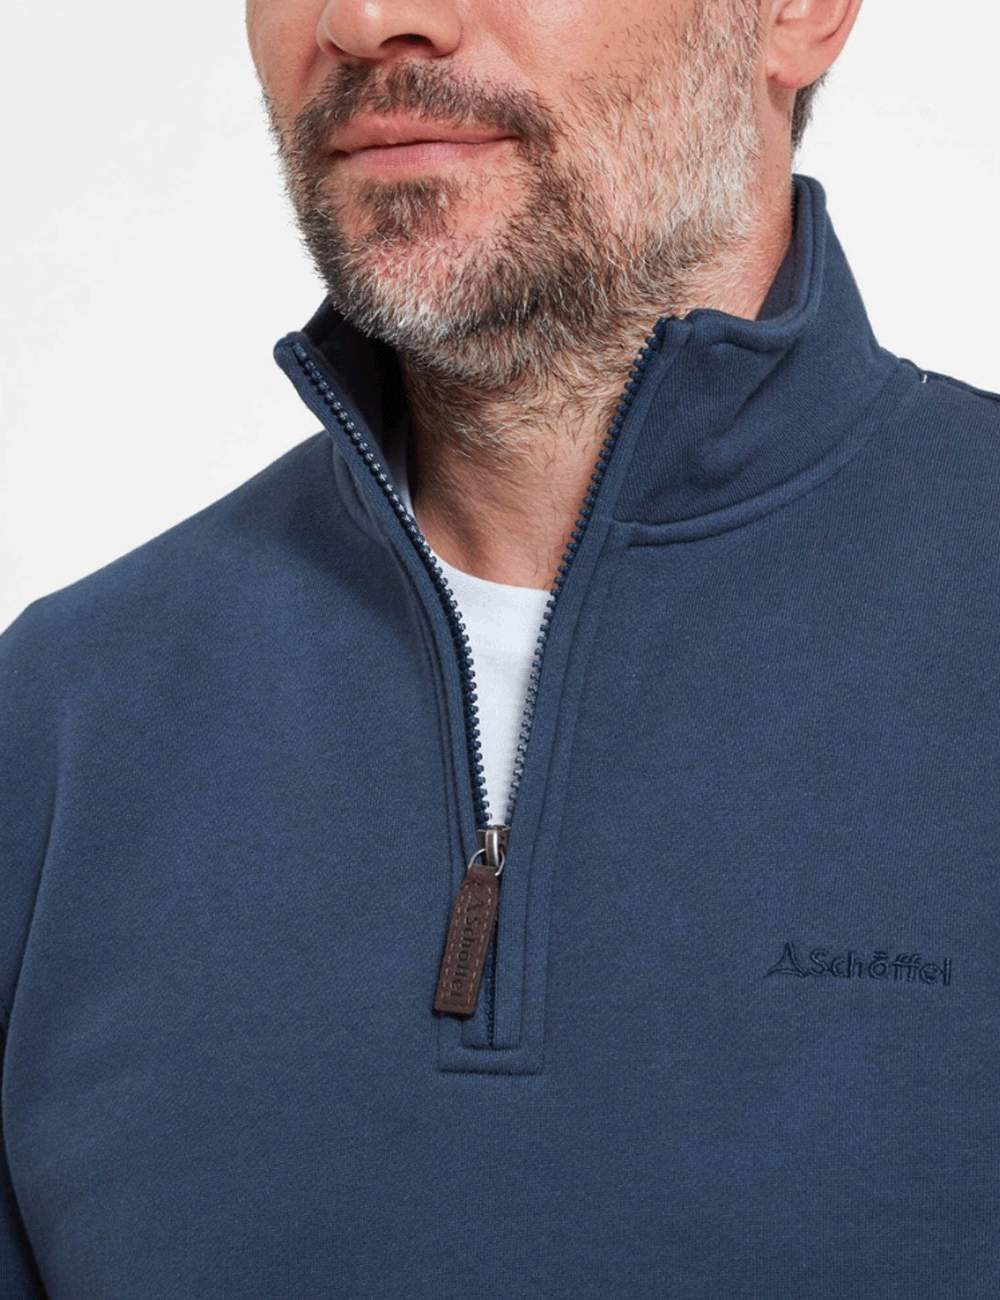 Close up at the neckline of man wearing the St. Merryn Sweatshirt